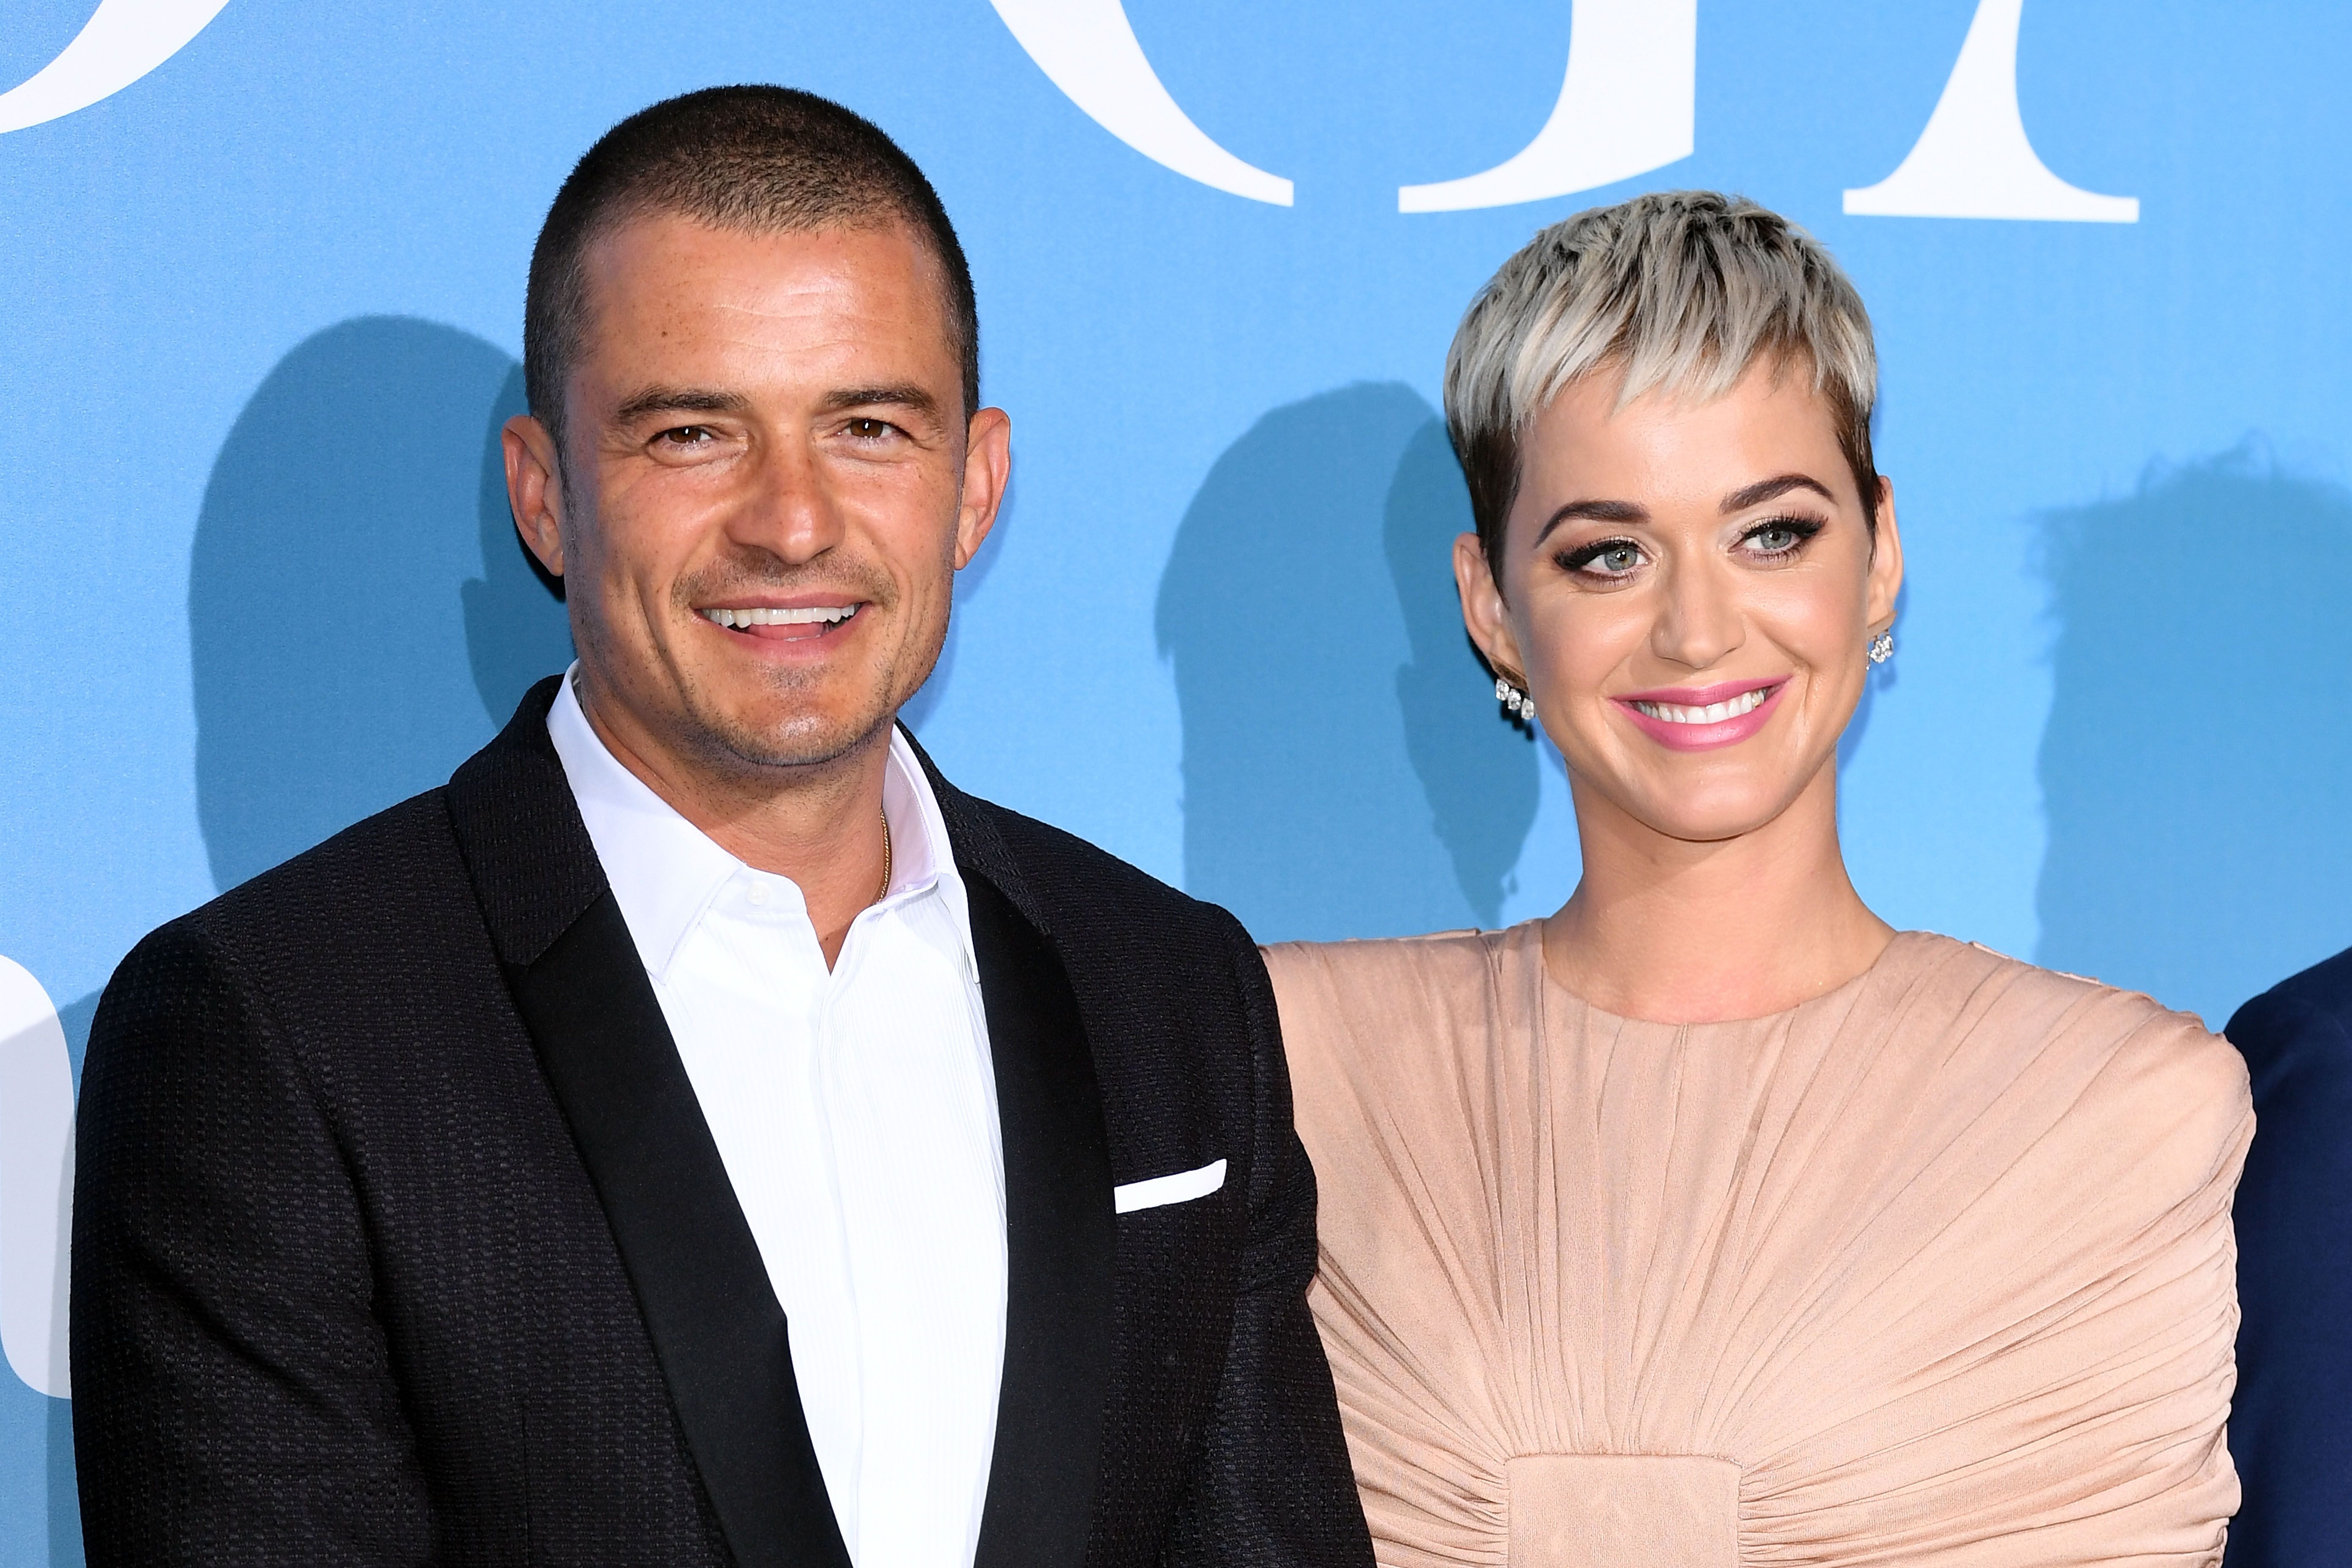 Katy Perry On How Orlando Bloom Proposed